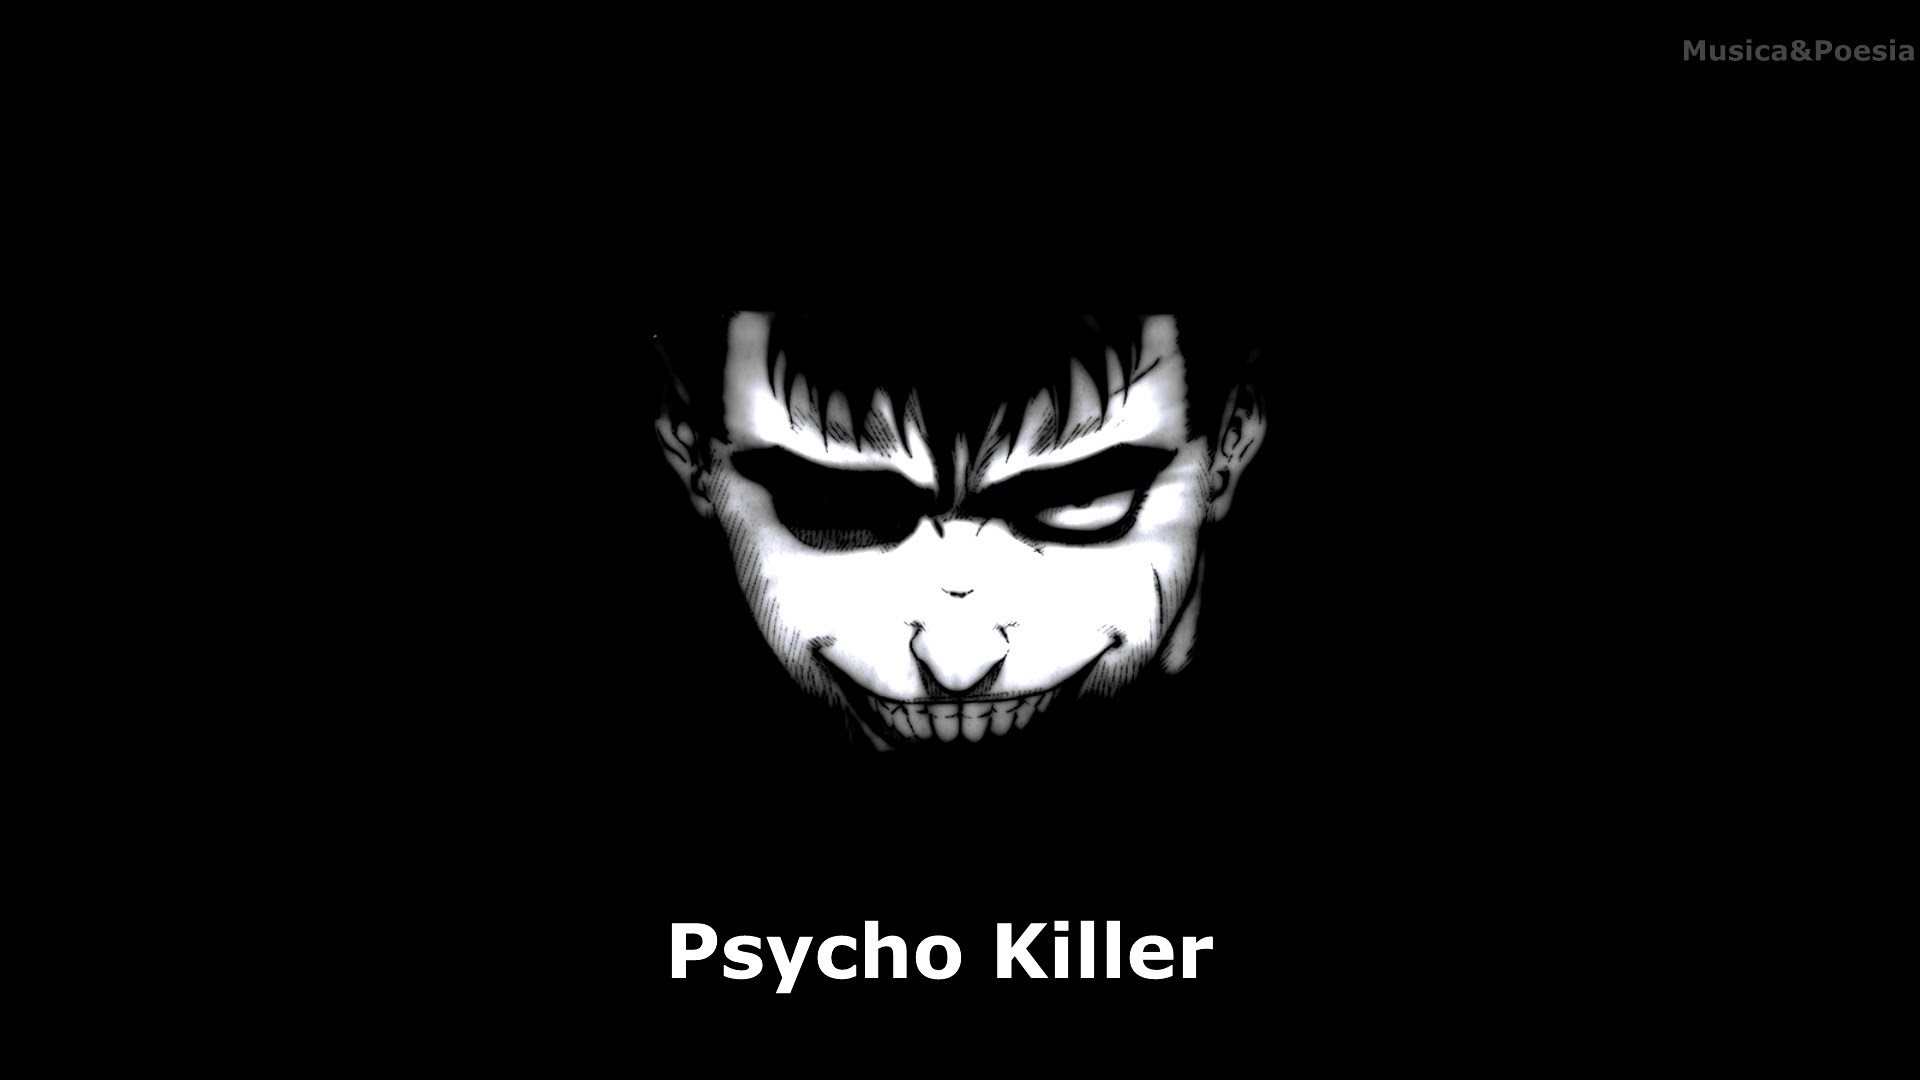 Free download psychopath wallpaper image collections of wallpapers x for your desktop mobile tablet explore psychopath wallpapers